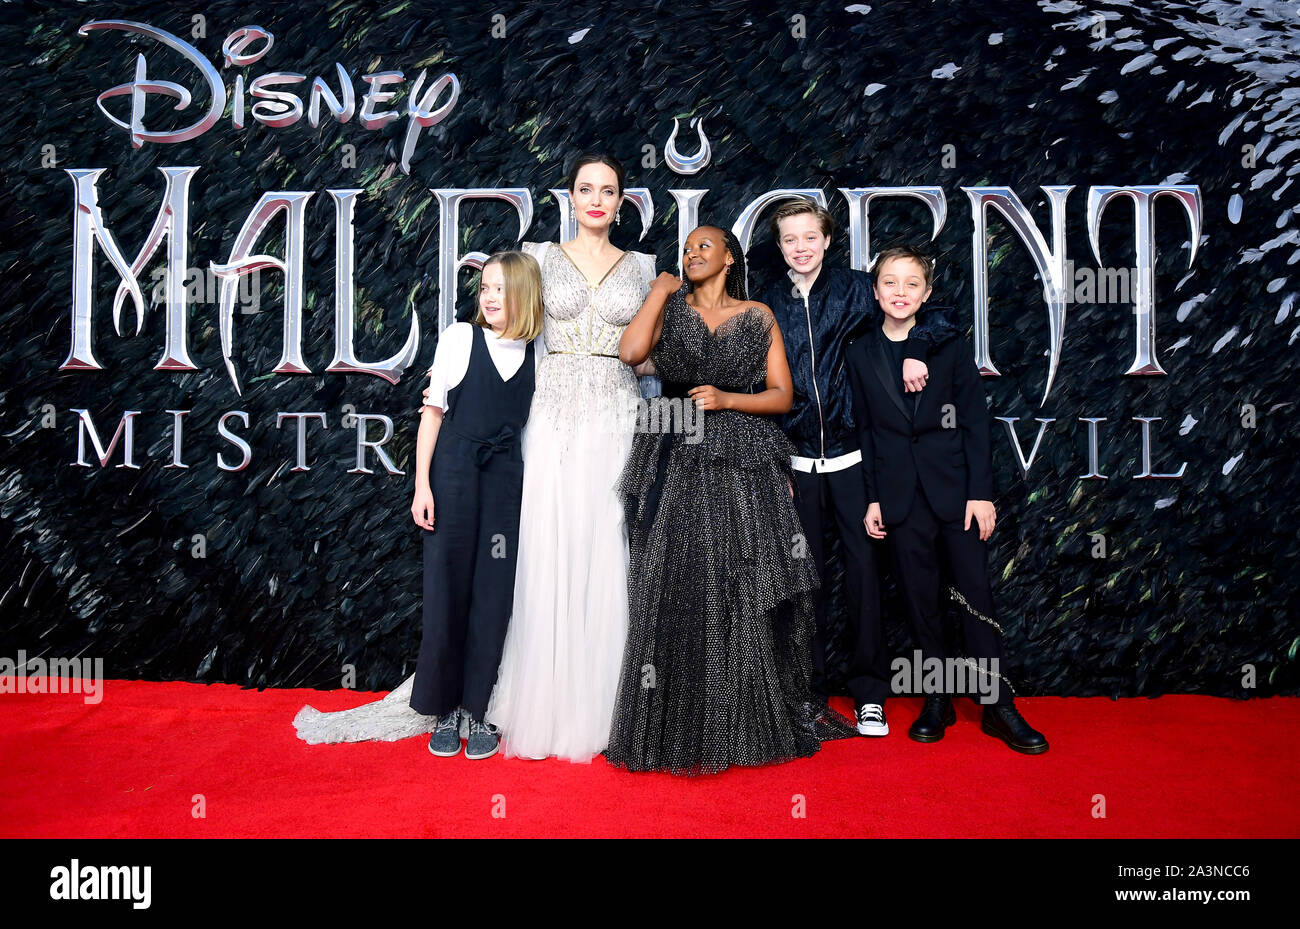 Angelina Jolie with children (left to right) Vivienne Marcheline Jolie-Pitt, Zahara Marley Jolie-Pitt, Shiloh Nouvel Jolie-Pitt and Knox Leon Jolie-Pitt attending the Maleficent: Mistress of Evil European Premiere held at Imax Waterloo in London. Picture date: Wednesday October 9, 2019. See PA story SHOWBIZ Maleficent. Photo credit should read: Ian West/PA Wire Stock Photo